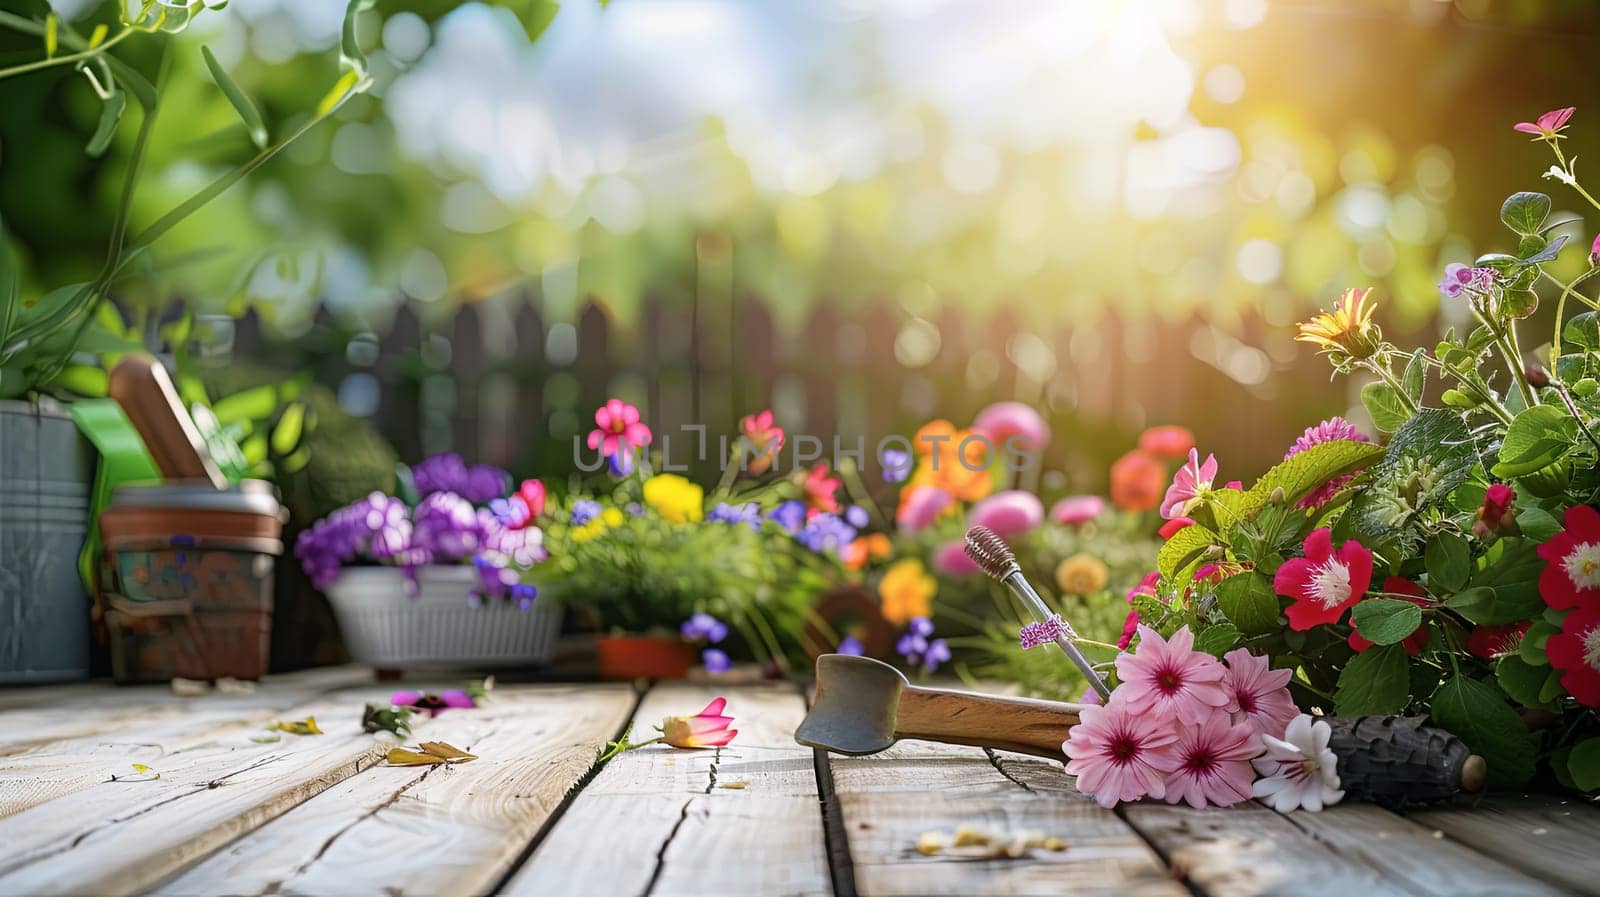 A wooden table is covered with a variety of vibrant flowers and garden tools, set against a blurred natural background.